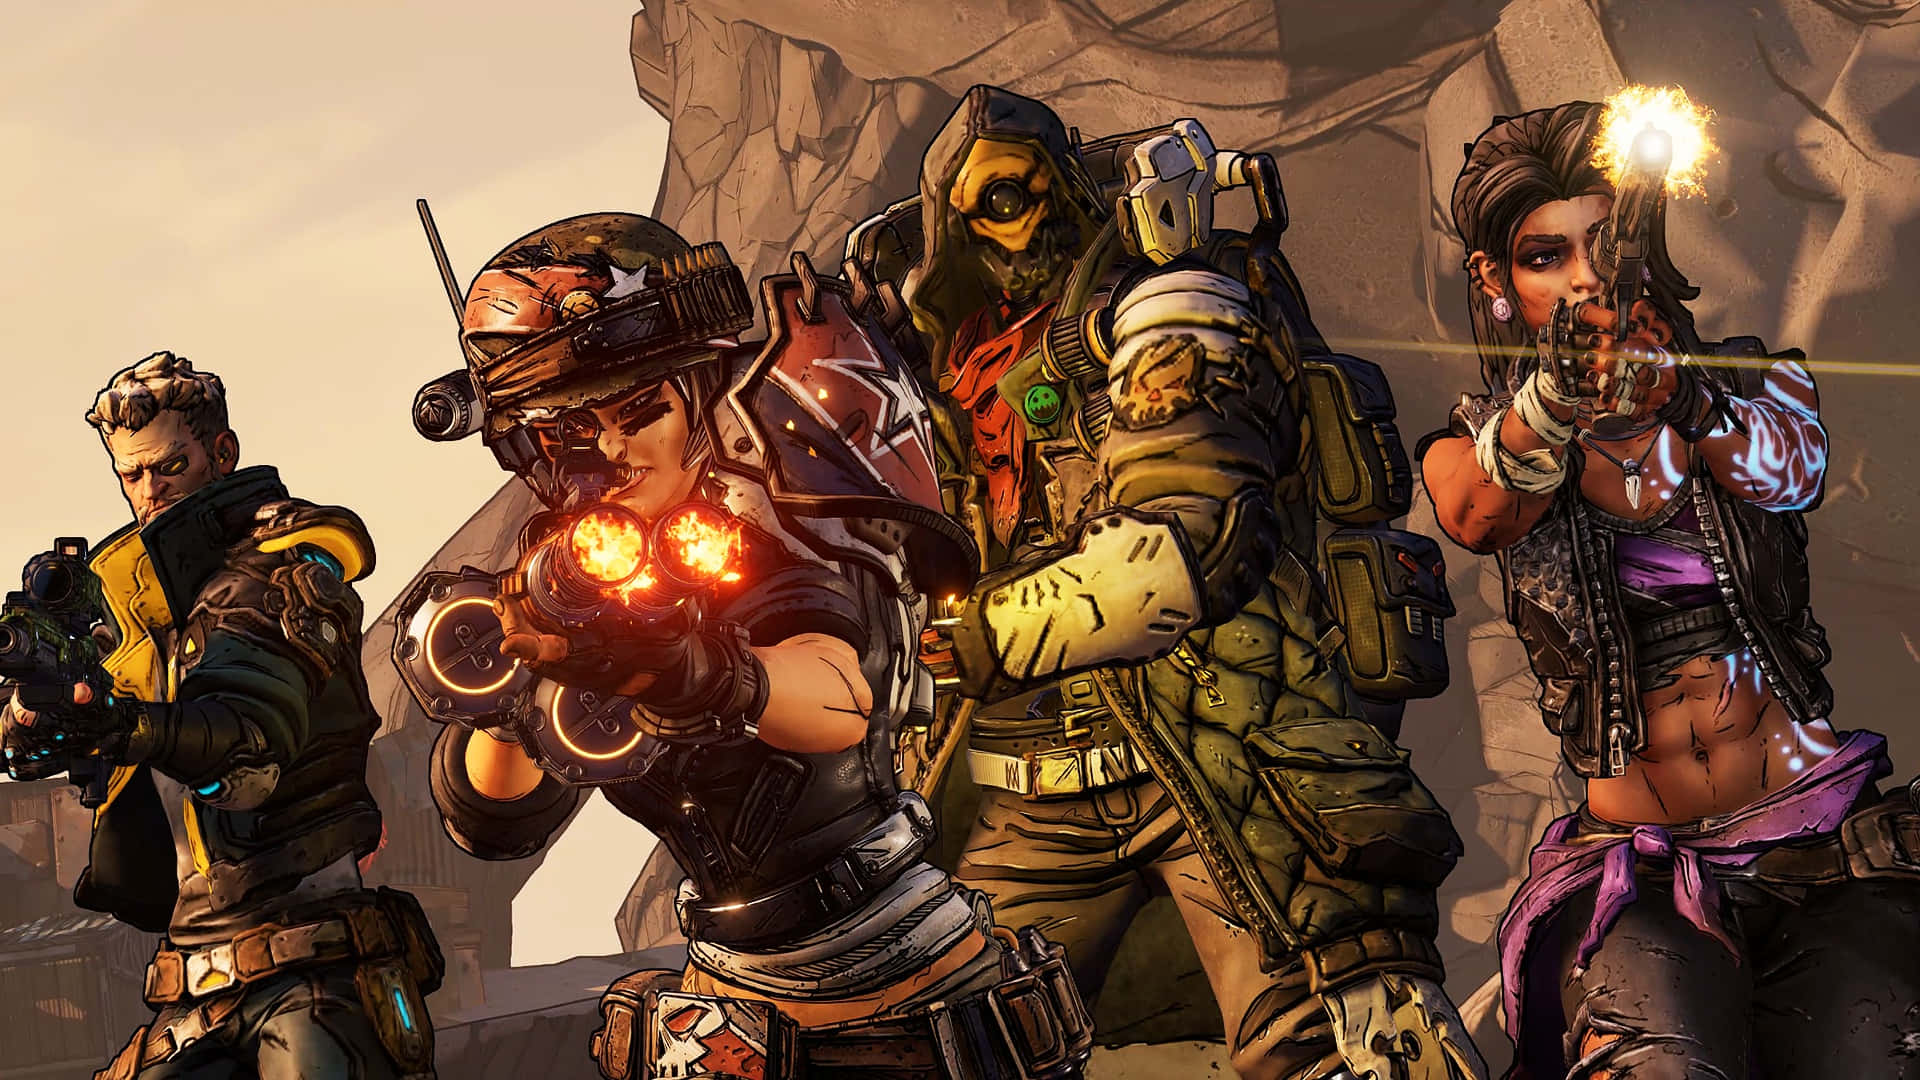 Experience the Action of Borderlands 3